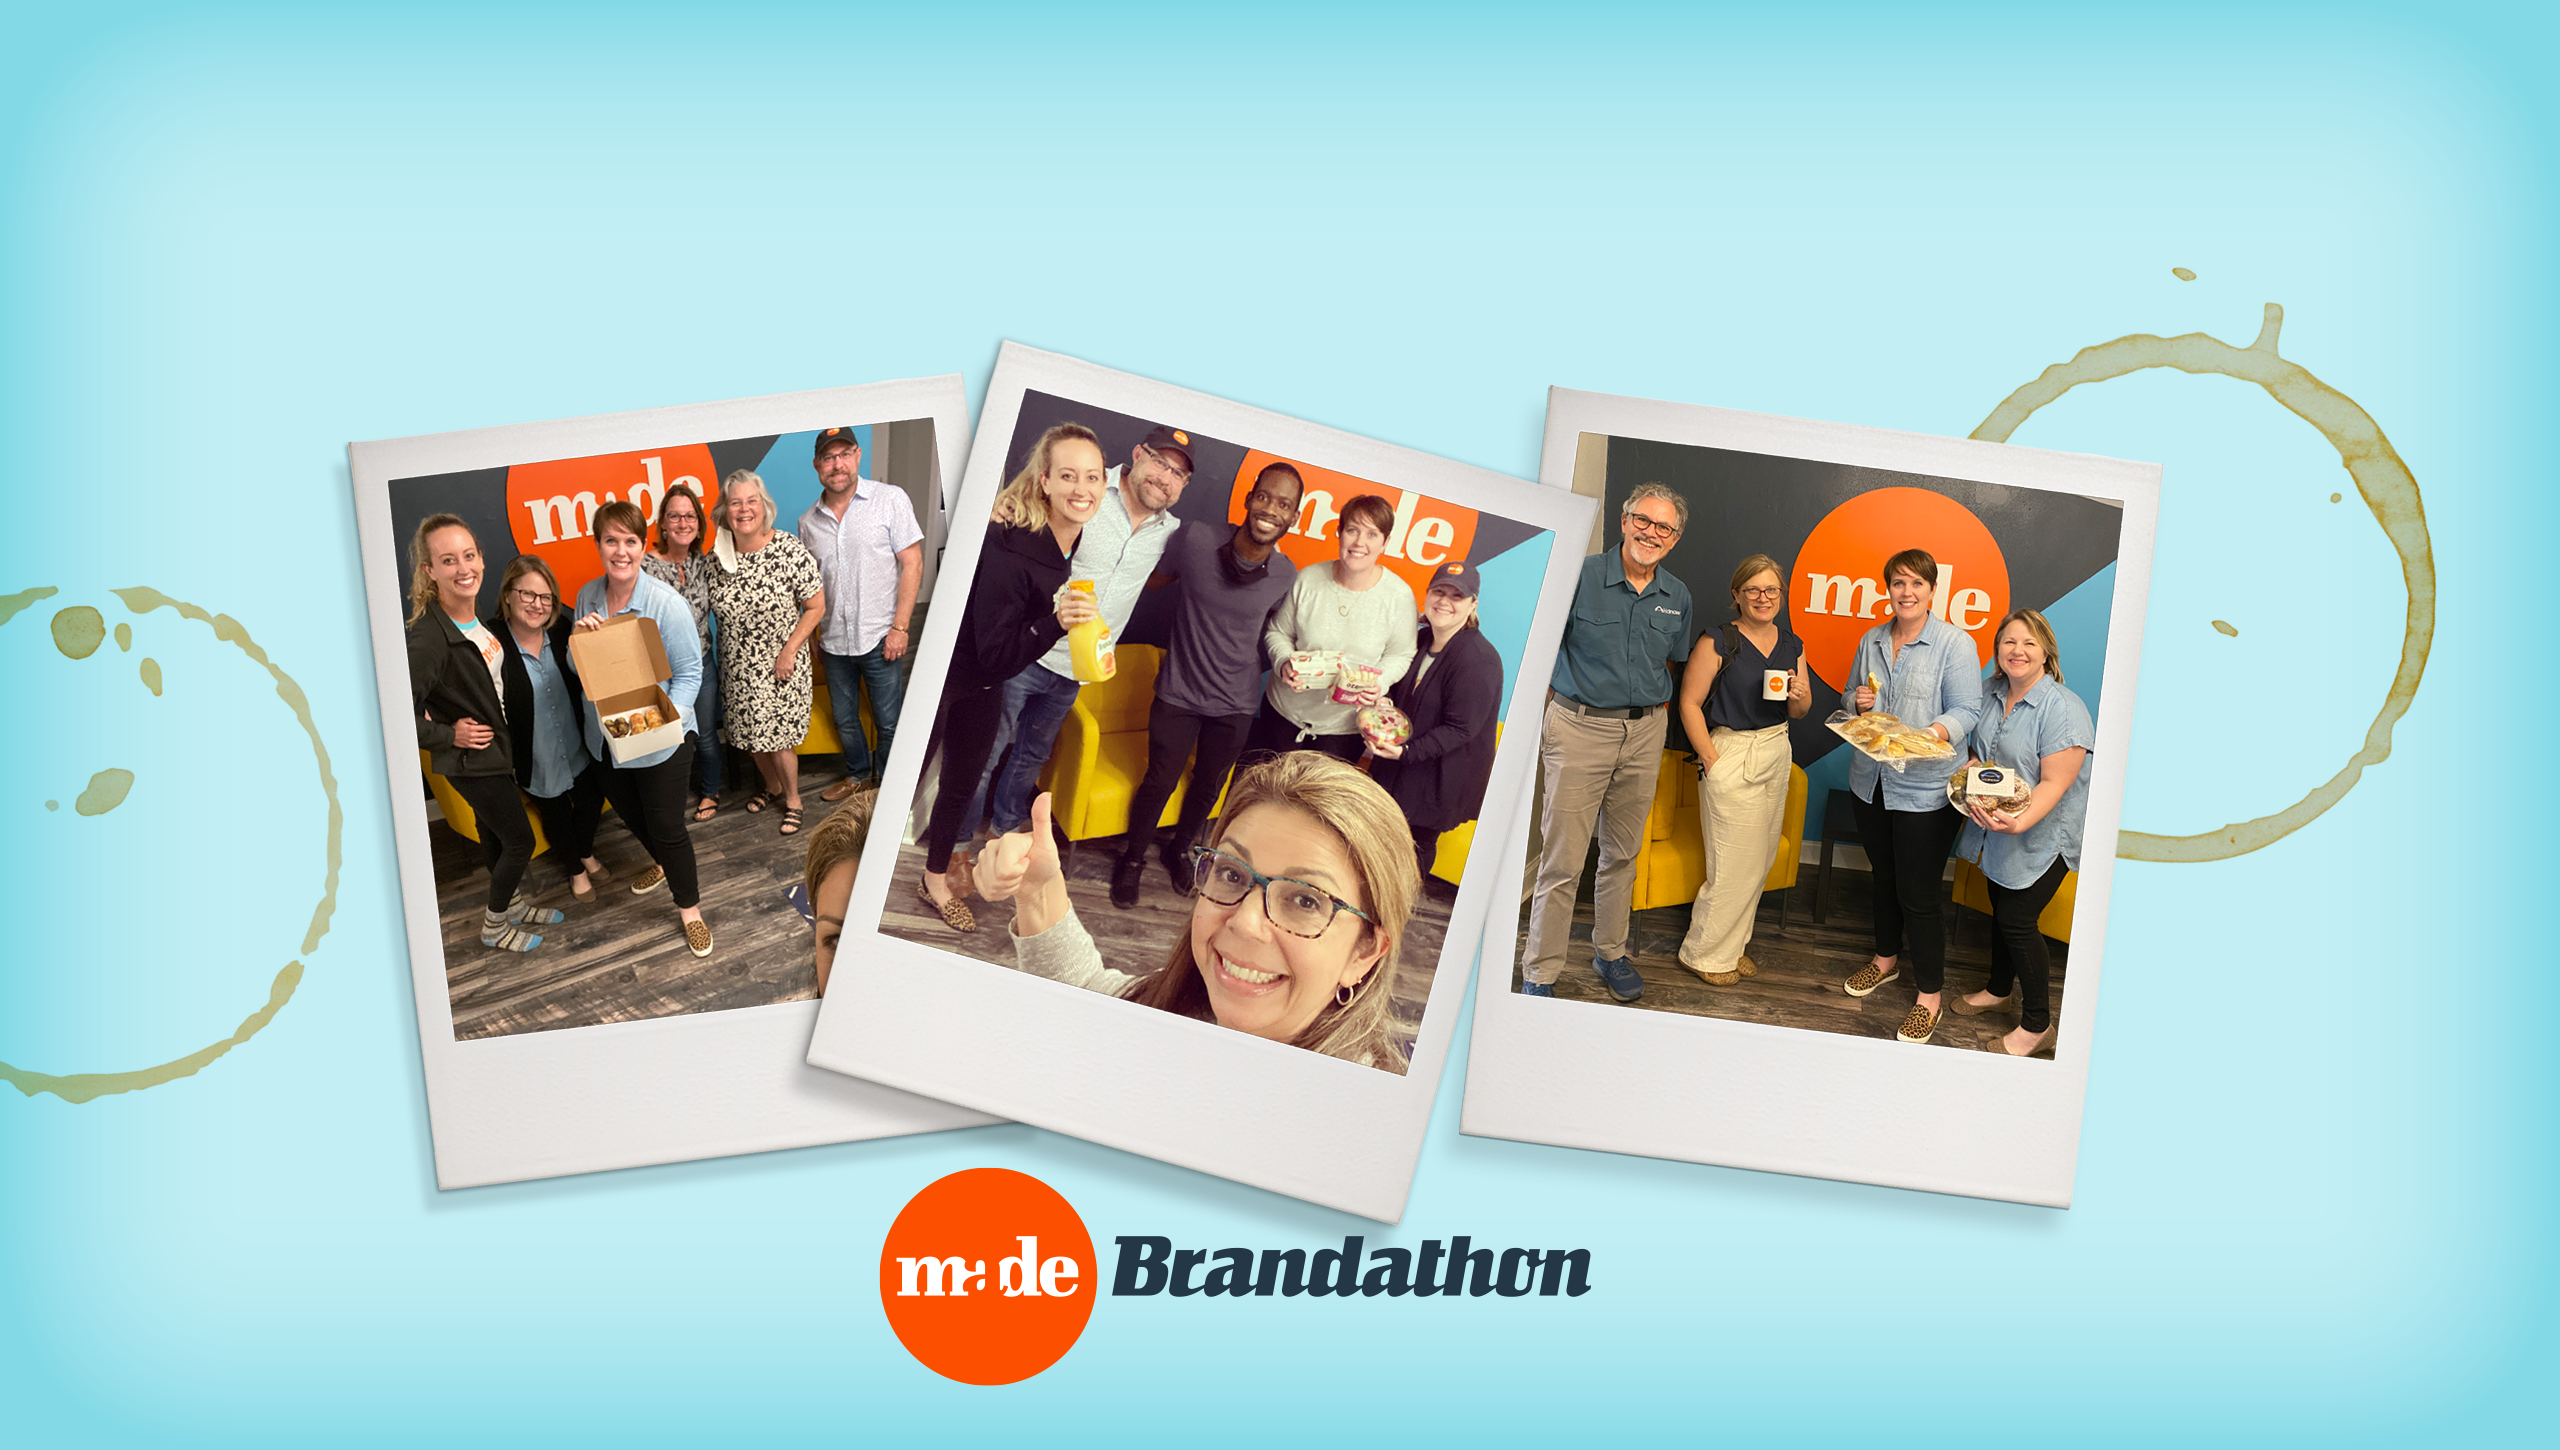 3 Takeaways From MADE's 10th Annual Brandathon